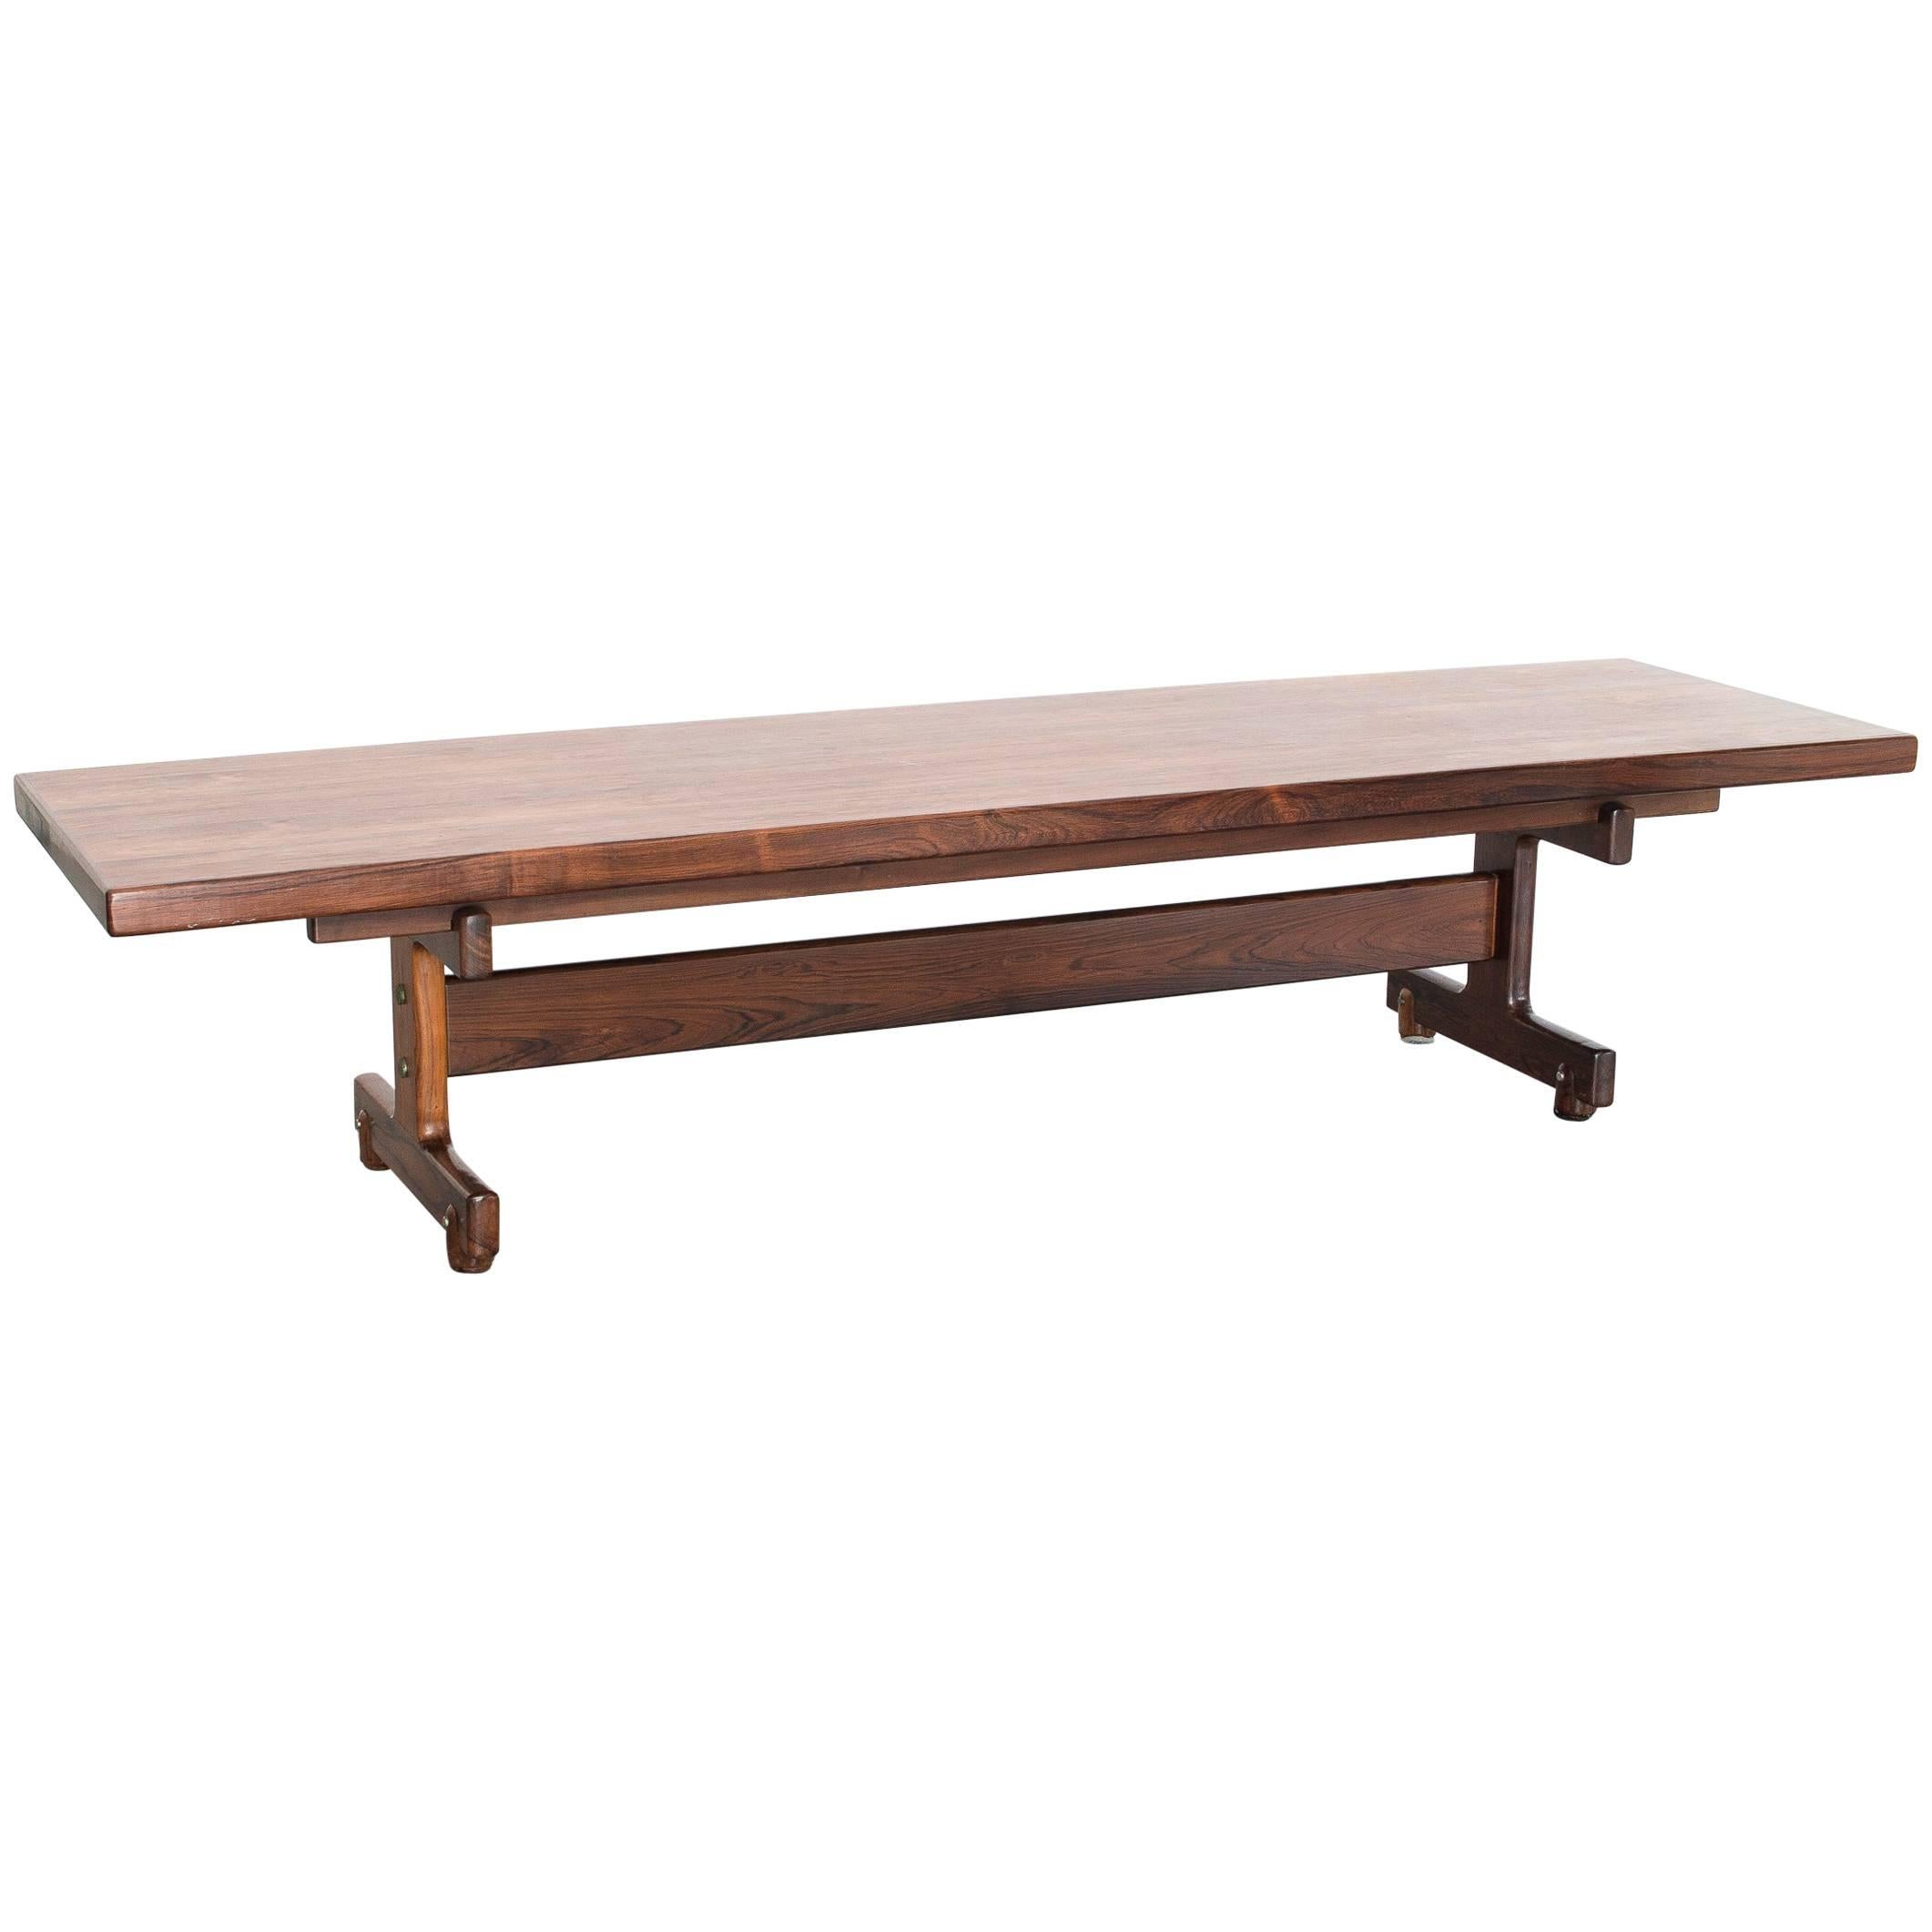 1960s "Cinthia" Bench or Coffee Table in Rosewood by Sergio Rodrigues , Brazil